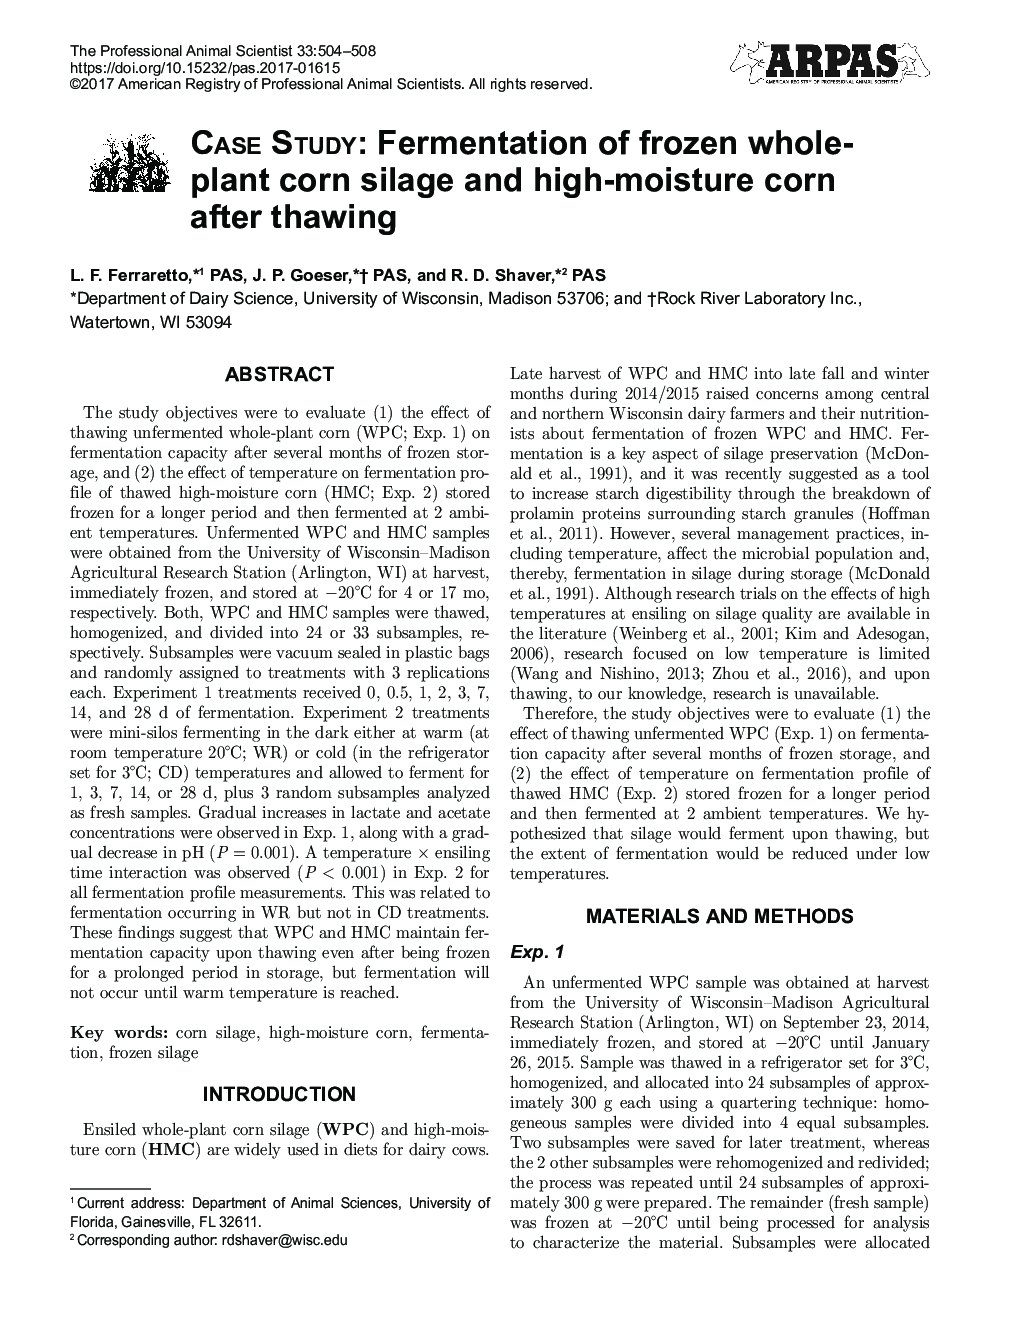 Case Study: Fermentation of frozen whole-plant corn silage and high-moisture corn after thawing